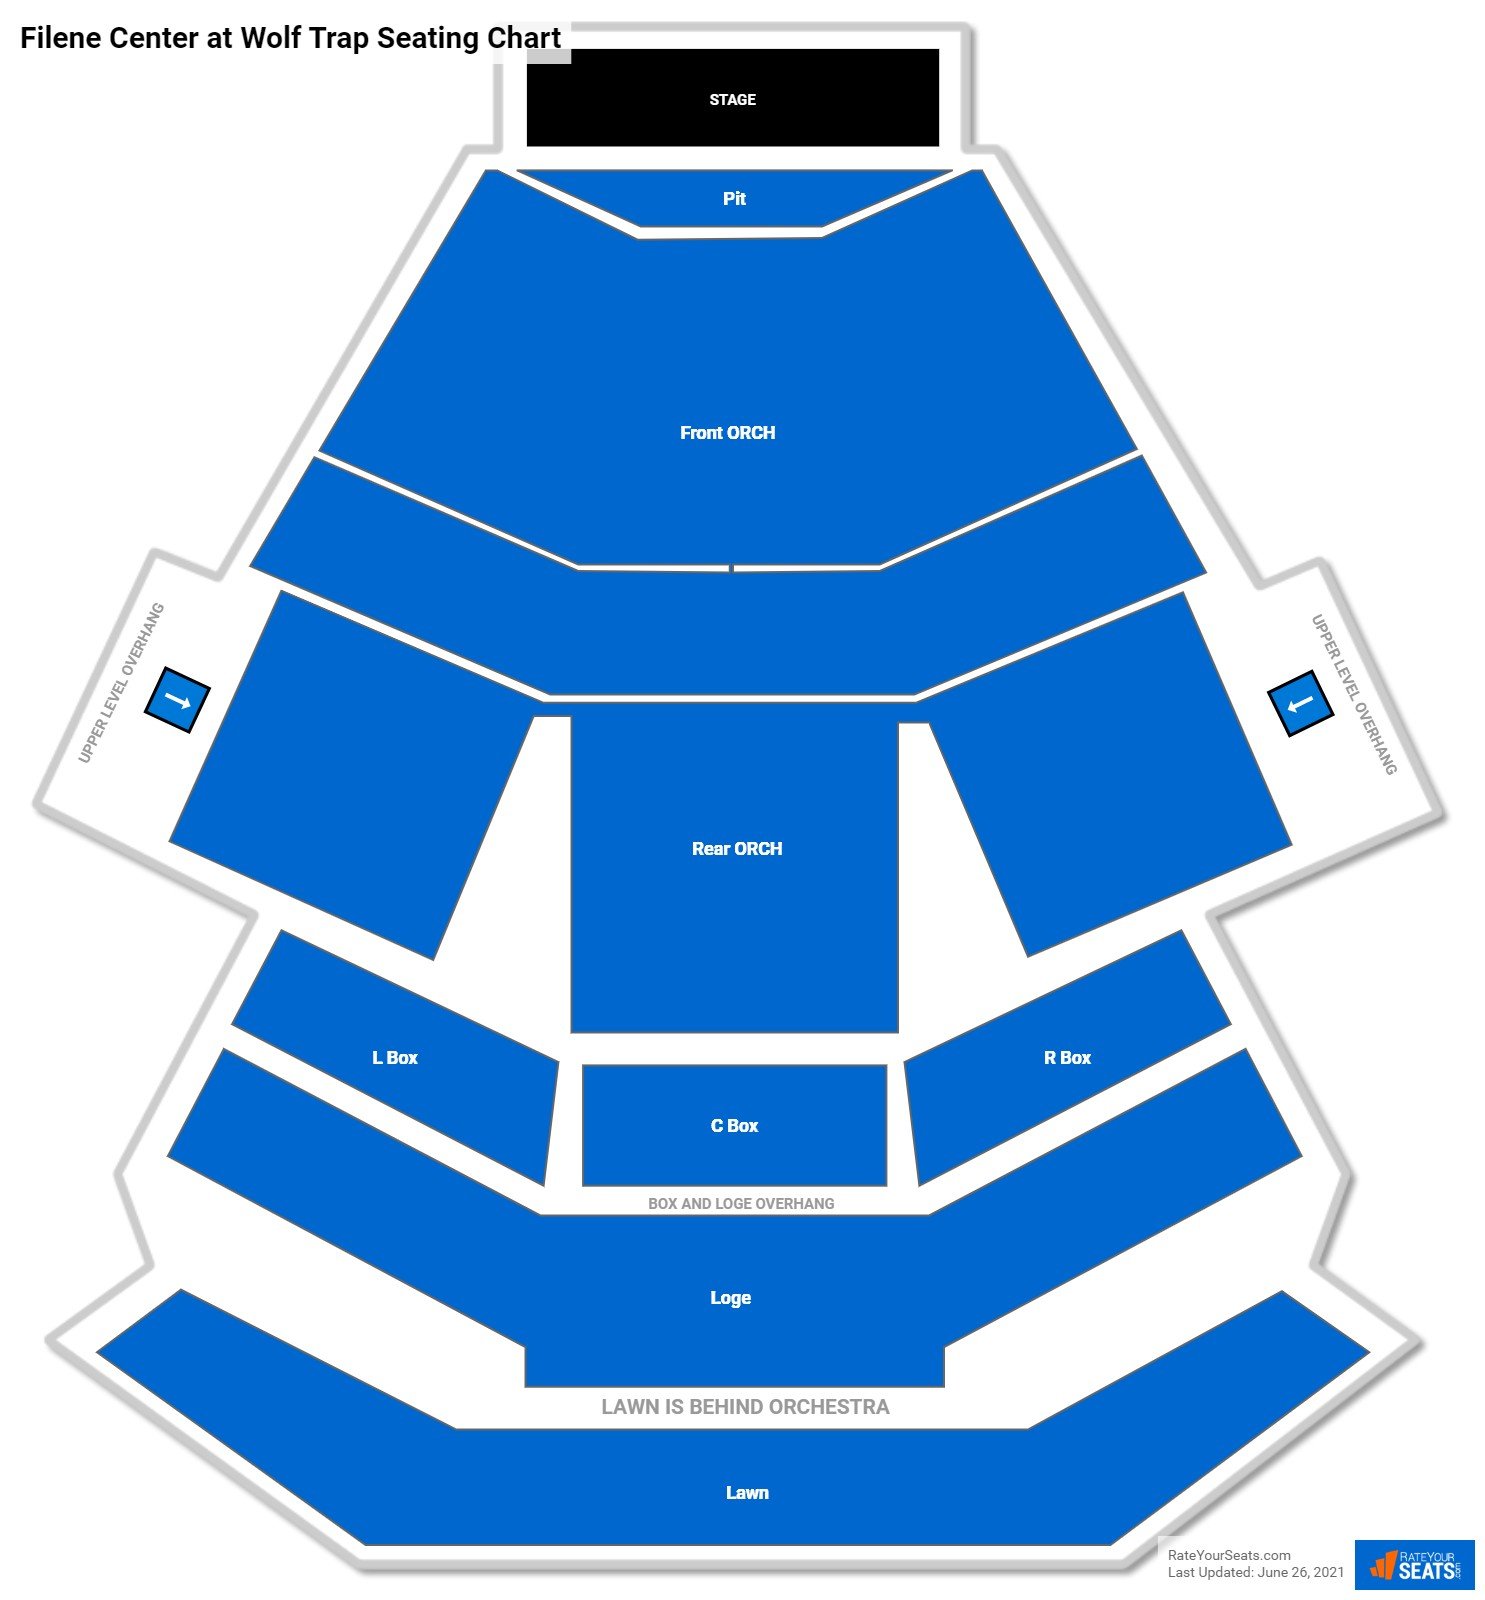 Filene Center at Wolf Trap Concert Seating Chart